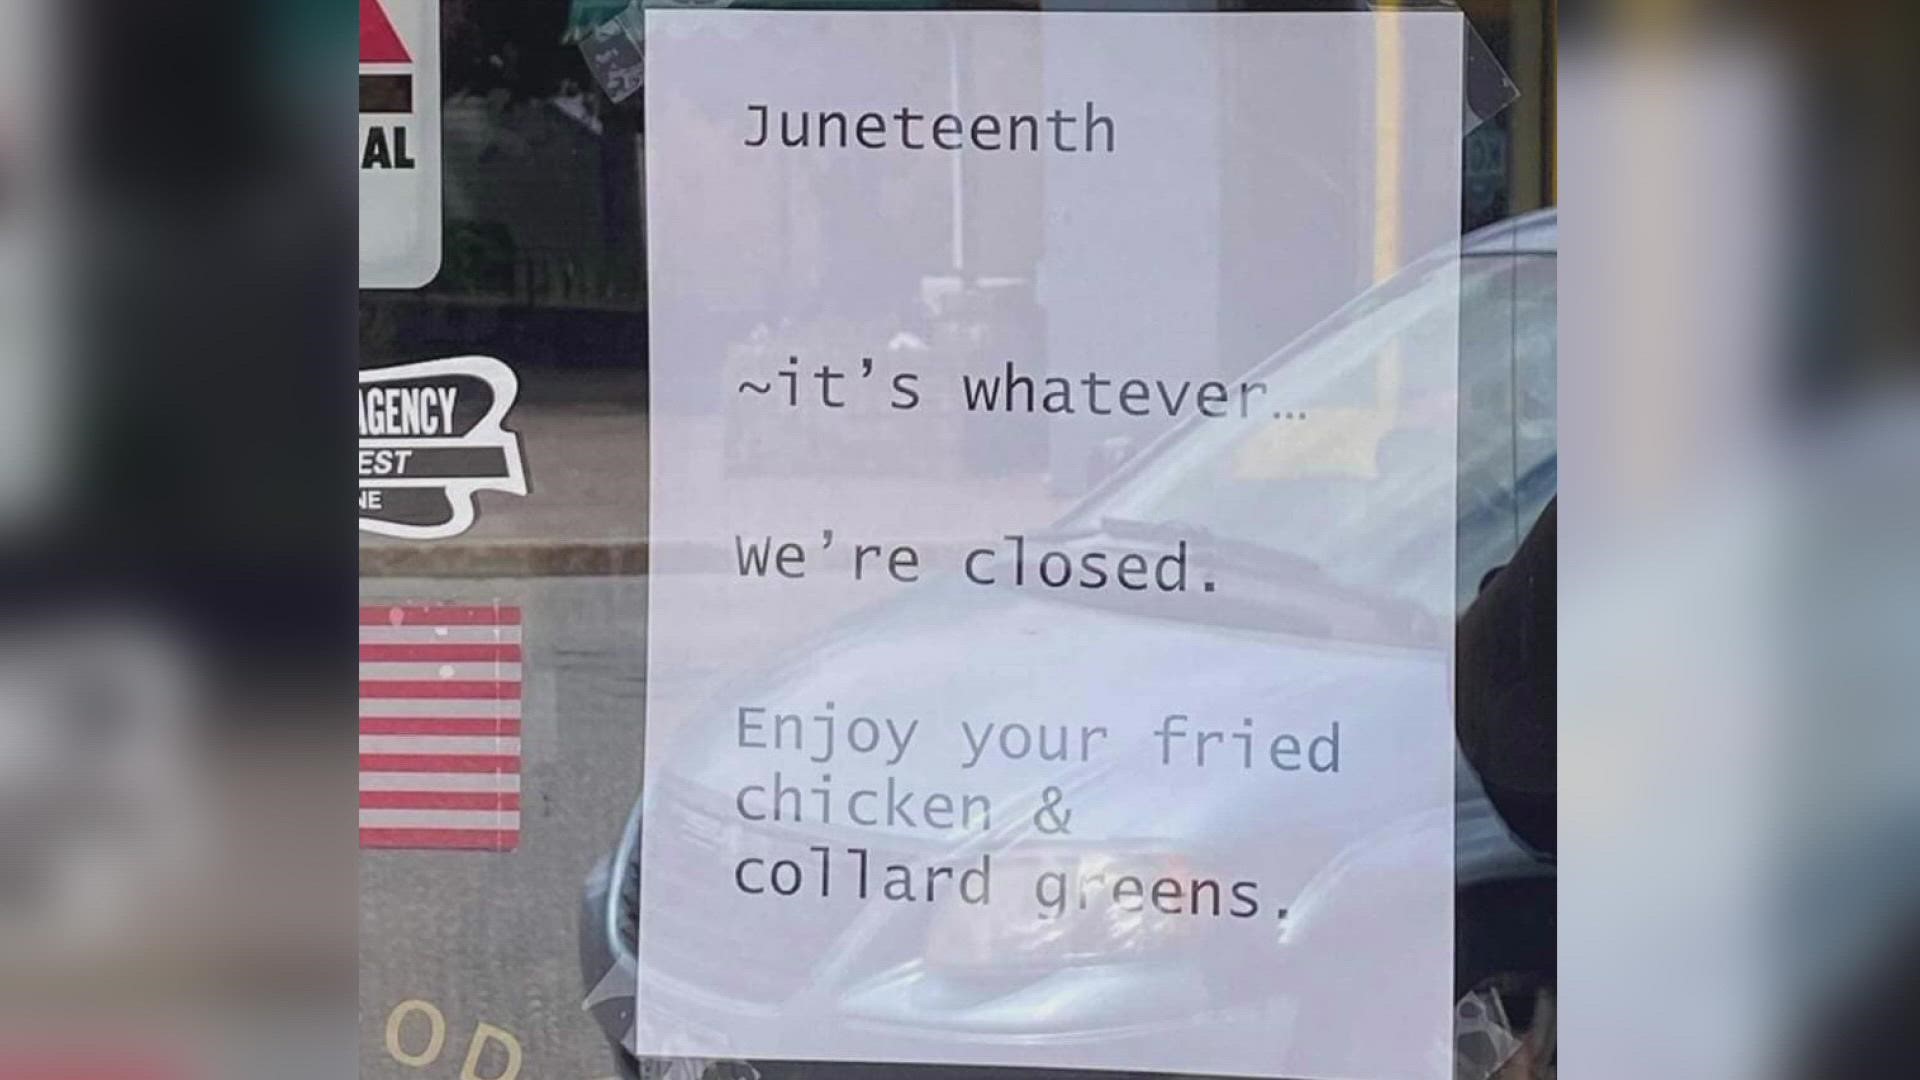 An insurance agency posted a sign to its door ahead of Juneteenth reading, "Juneteenth, it's whatever... we're closed. Enjoy your fried chicken and collard greens."